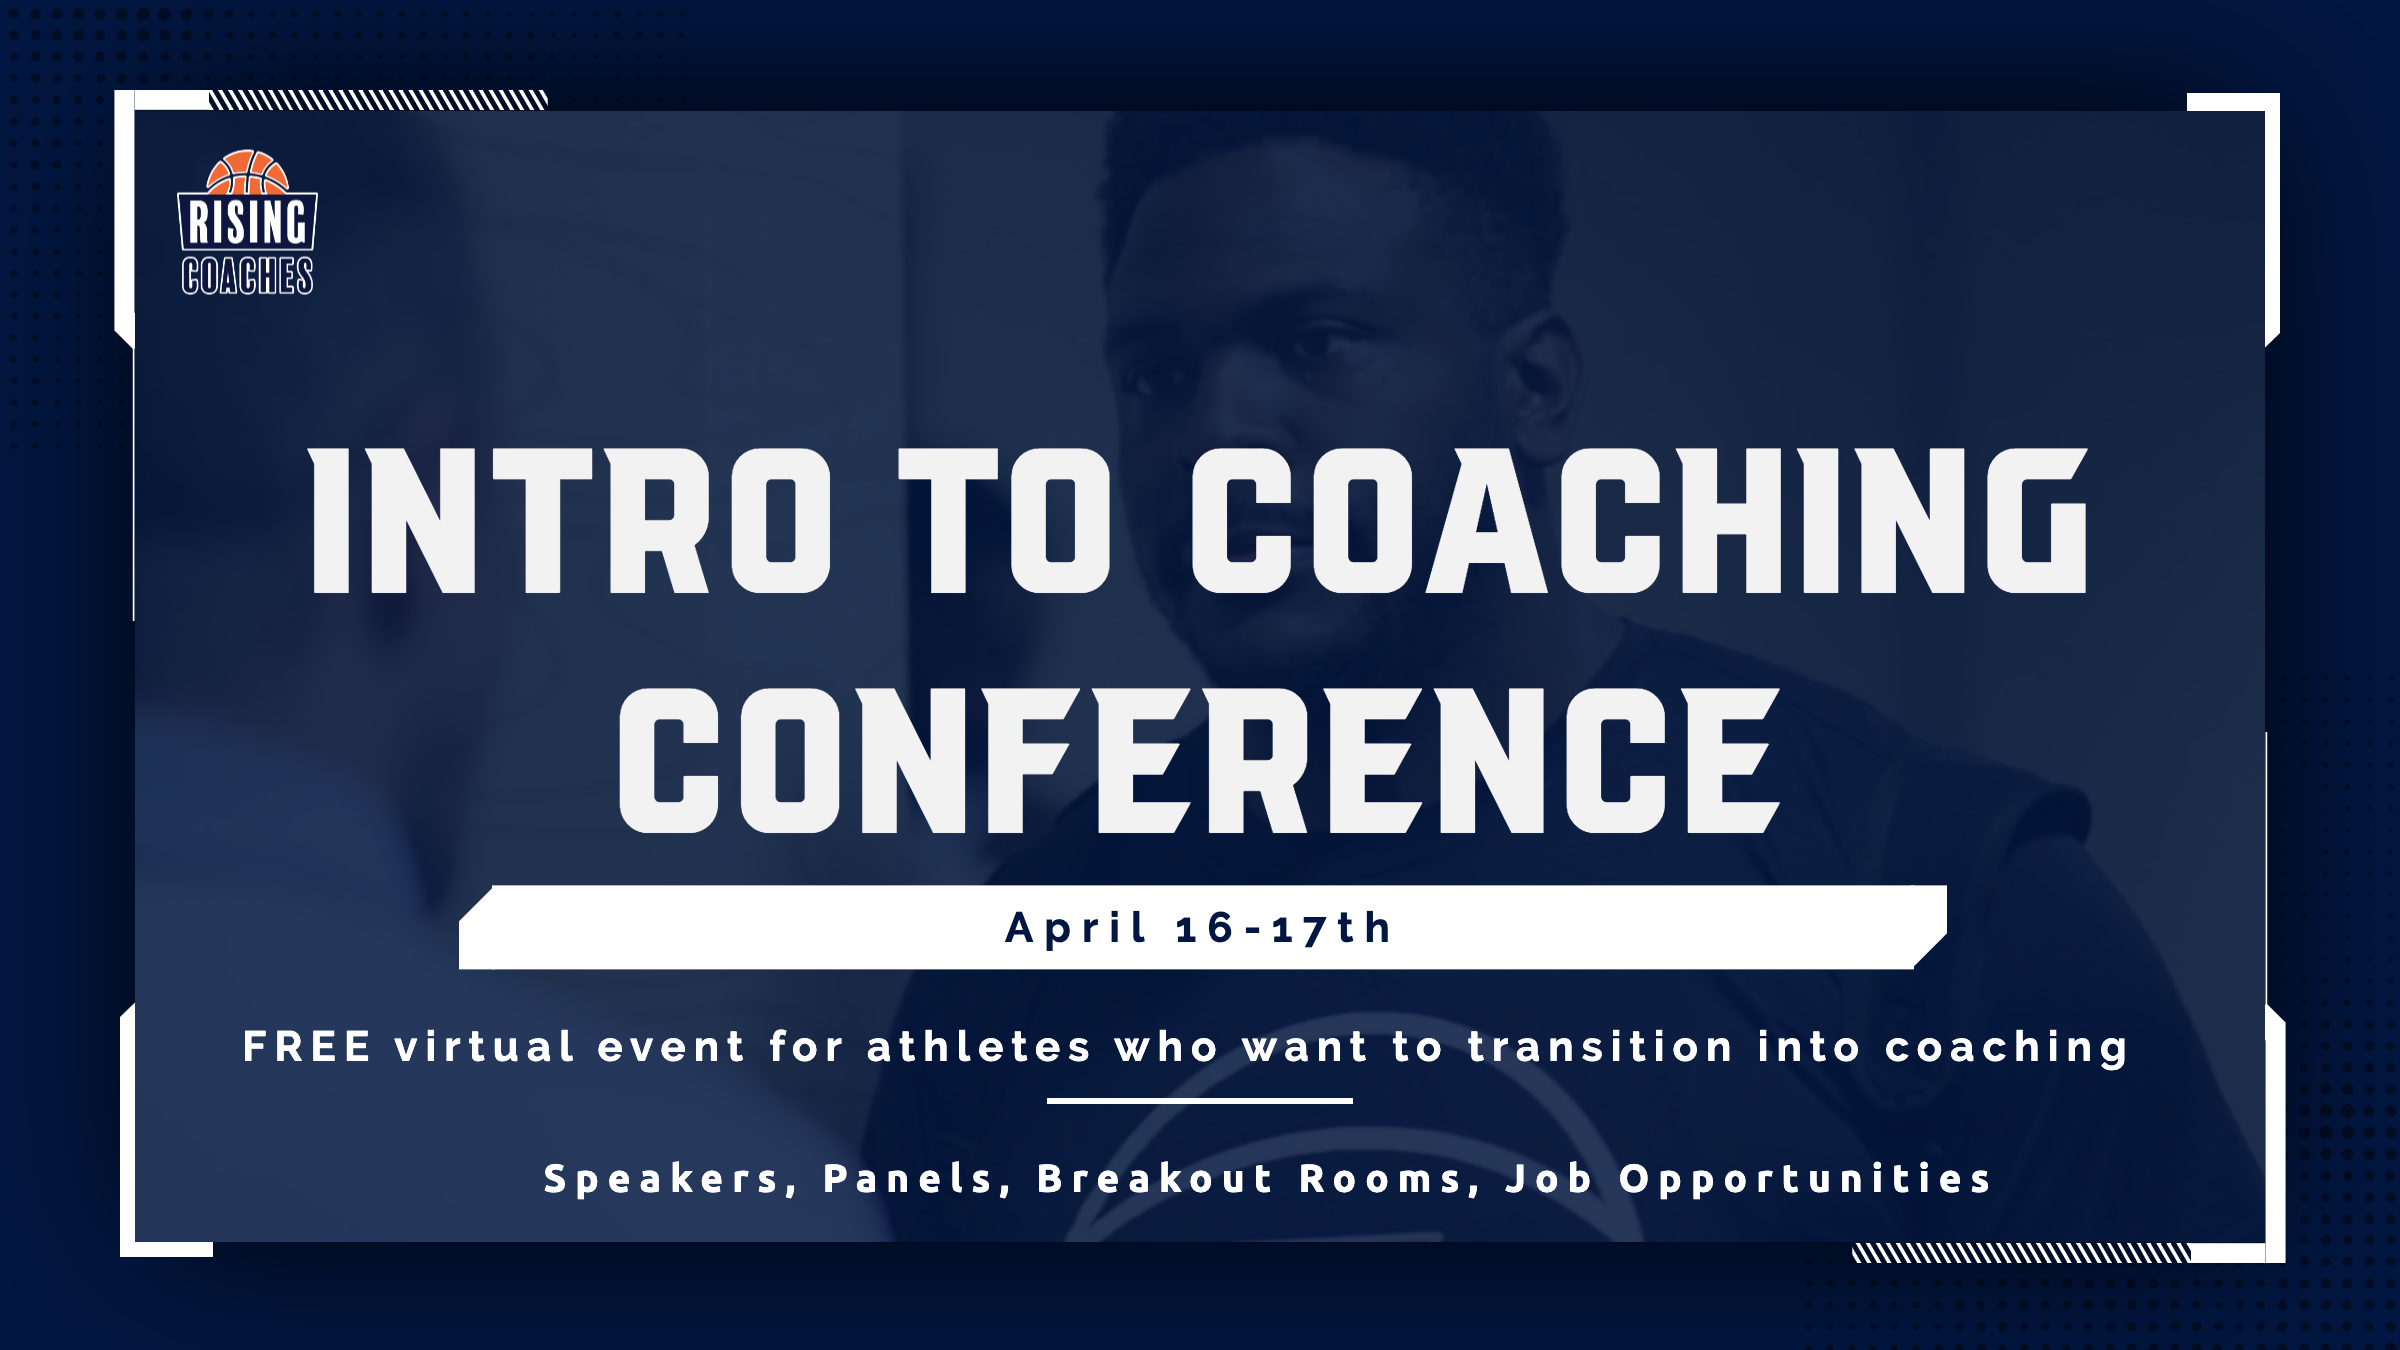 Rising Coaches Launches Intro to Coaching to Help Athletes Transition into Coaching